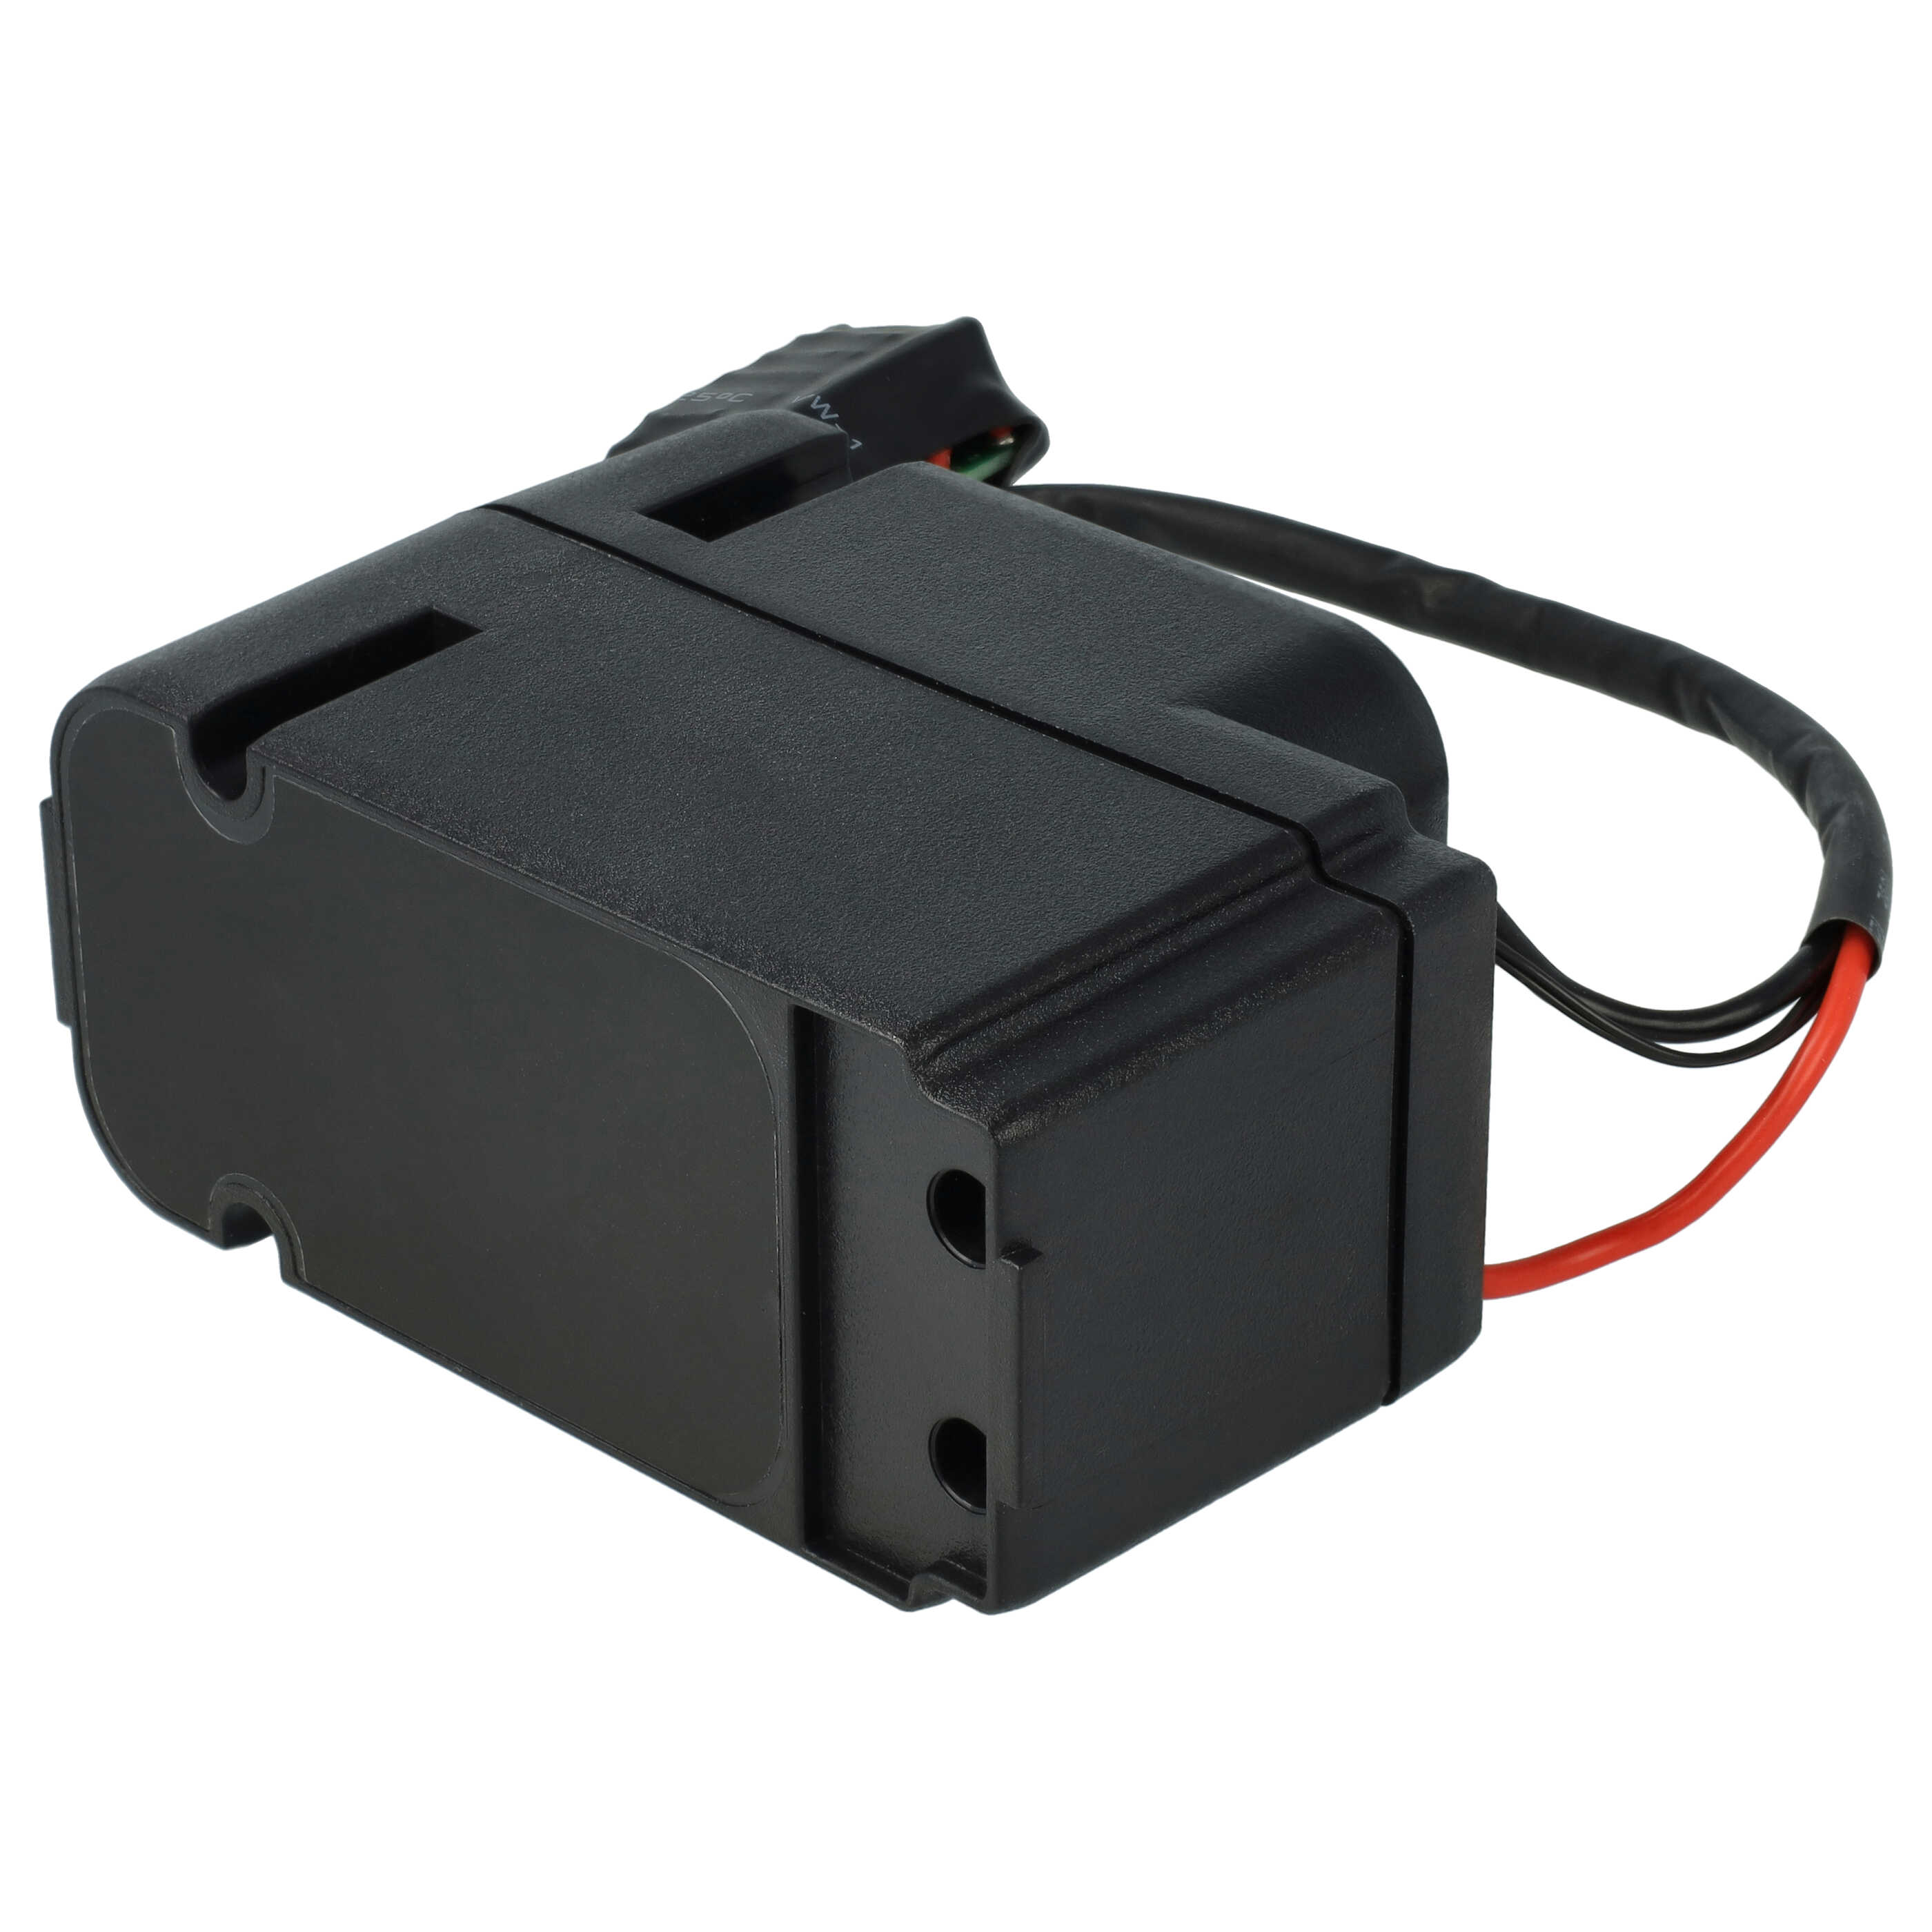 Lawnmower Battery Replacement for Worx 50022580, 50029621, 50026980, 50022713 - 2500mAh 28V Li-Ion, black